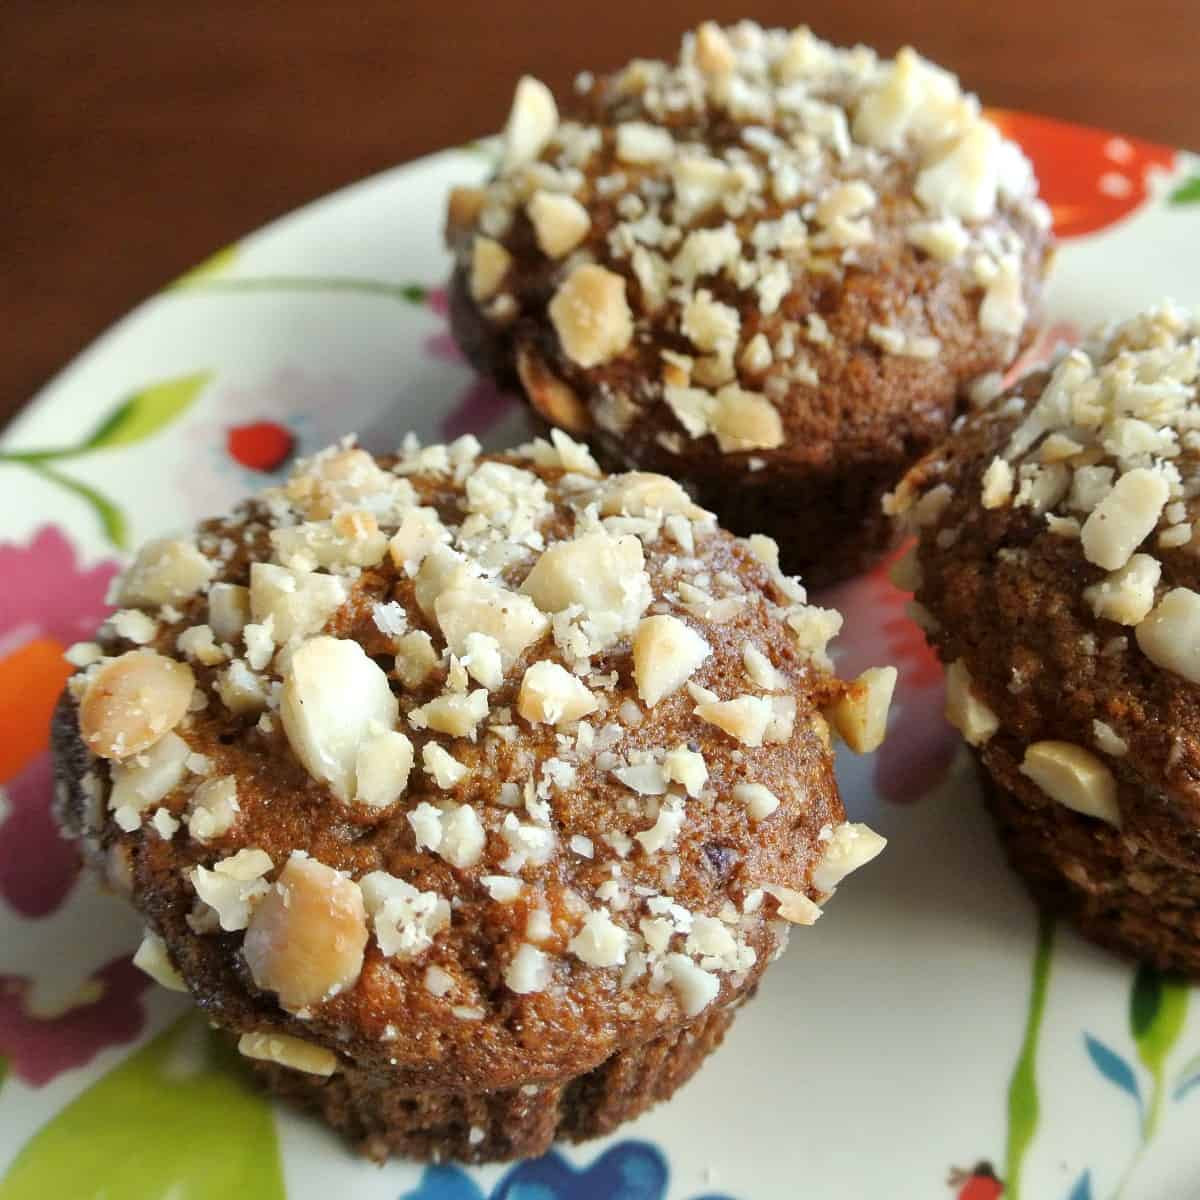 Angled photo of three muffins on a flowered plate with nuts acattered.